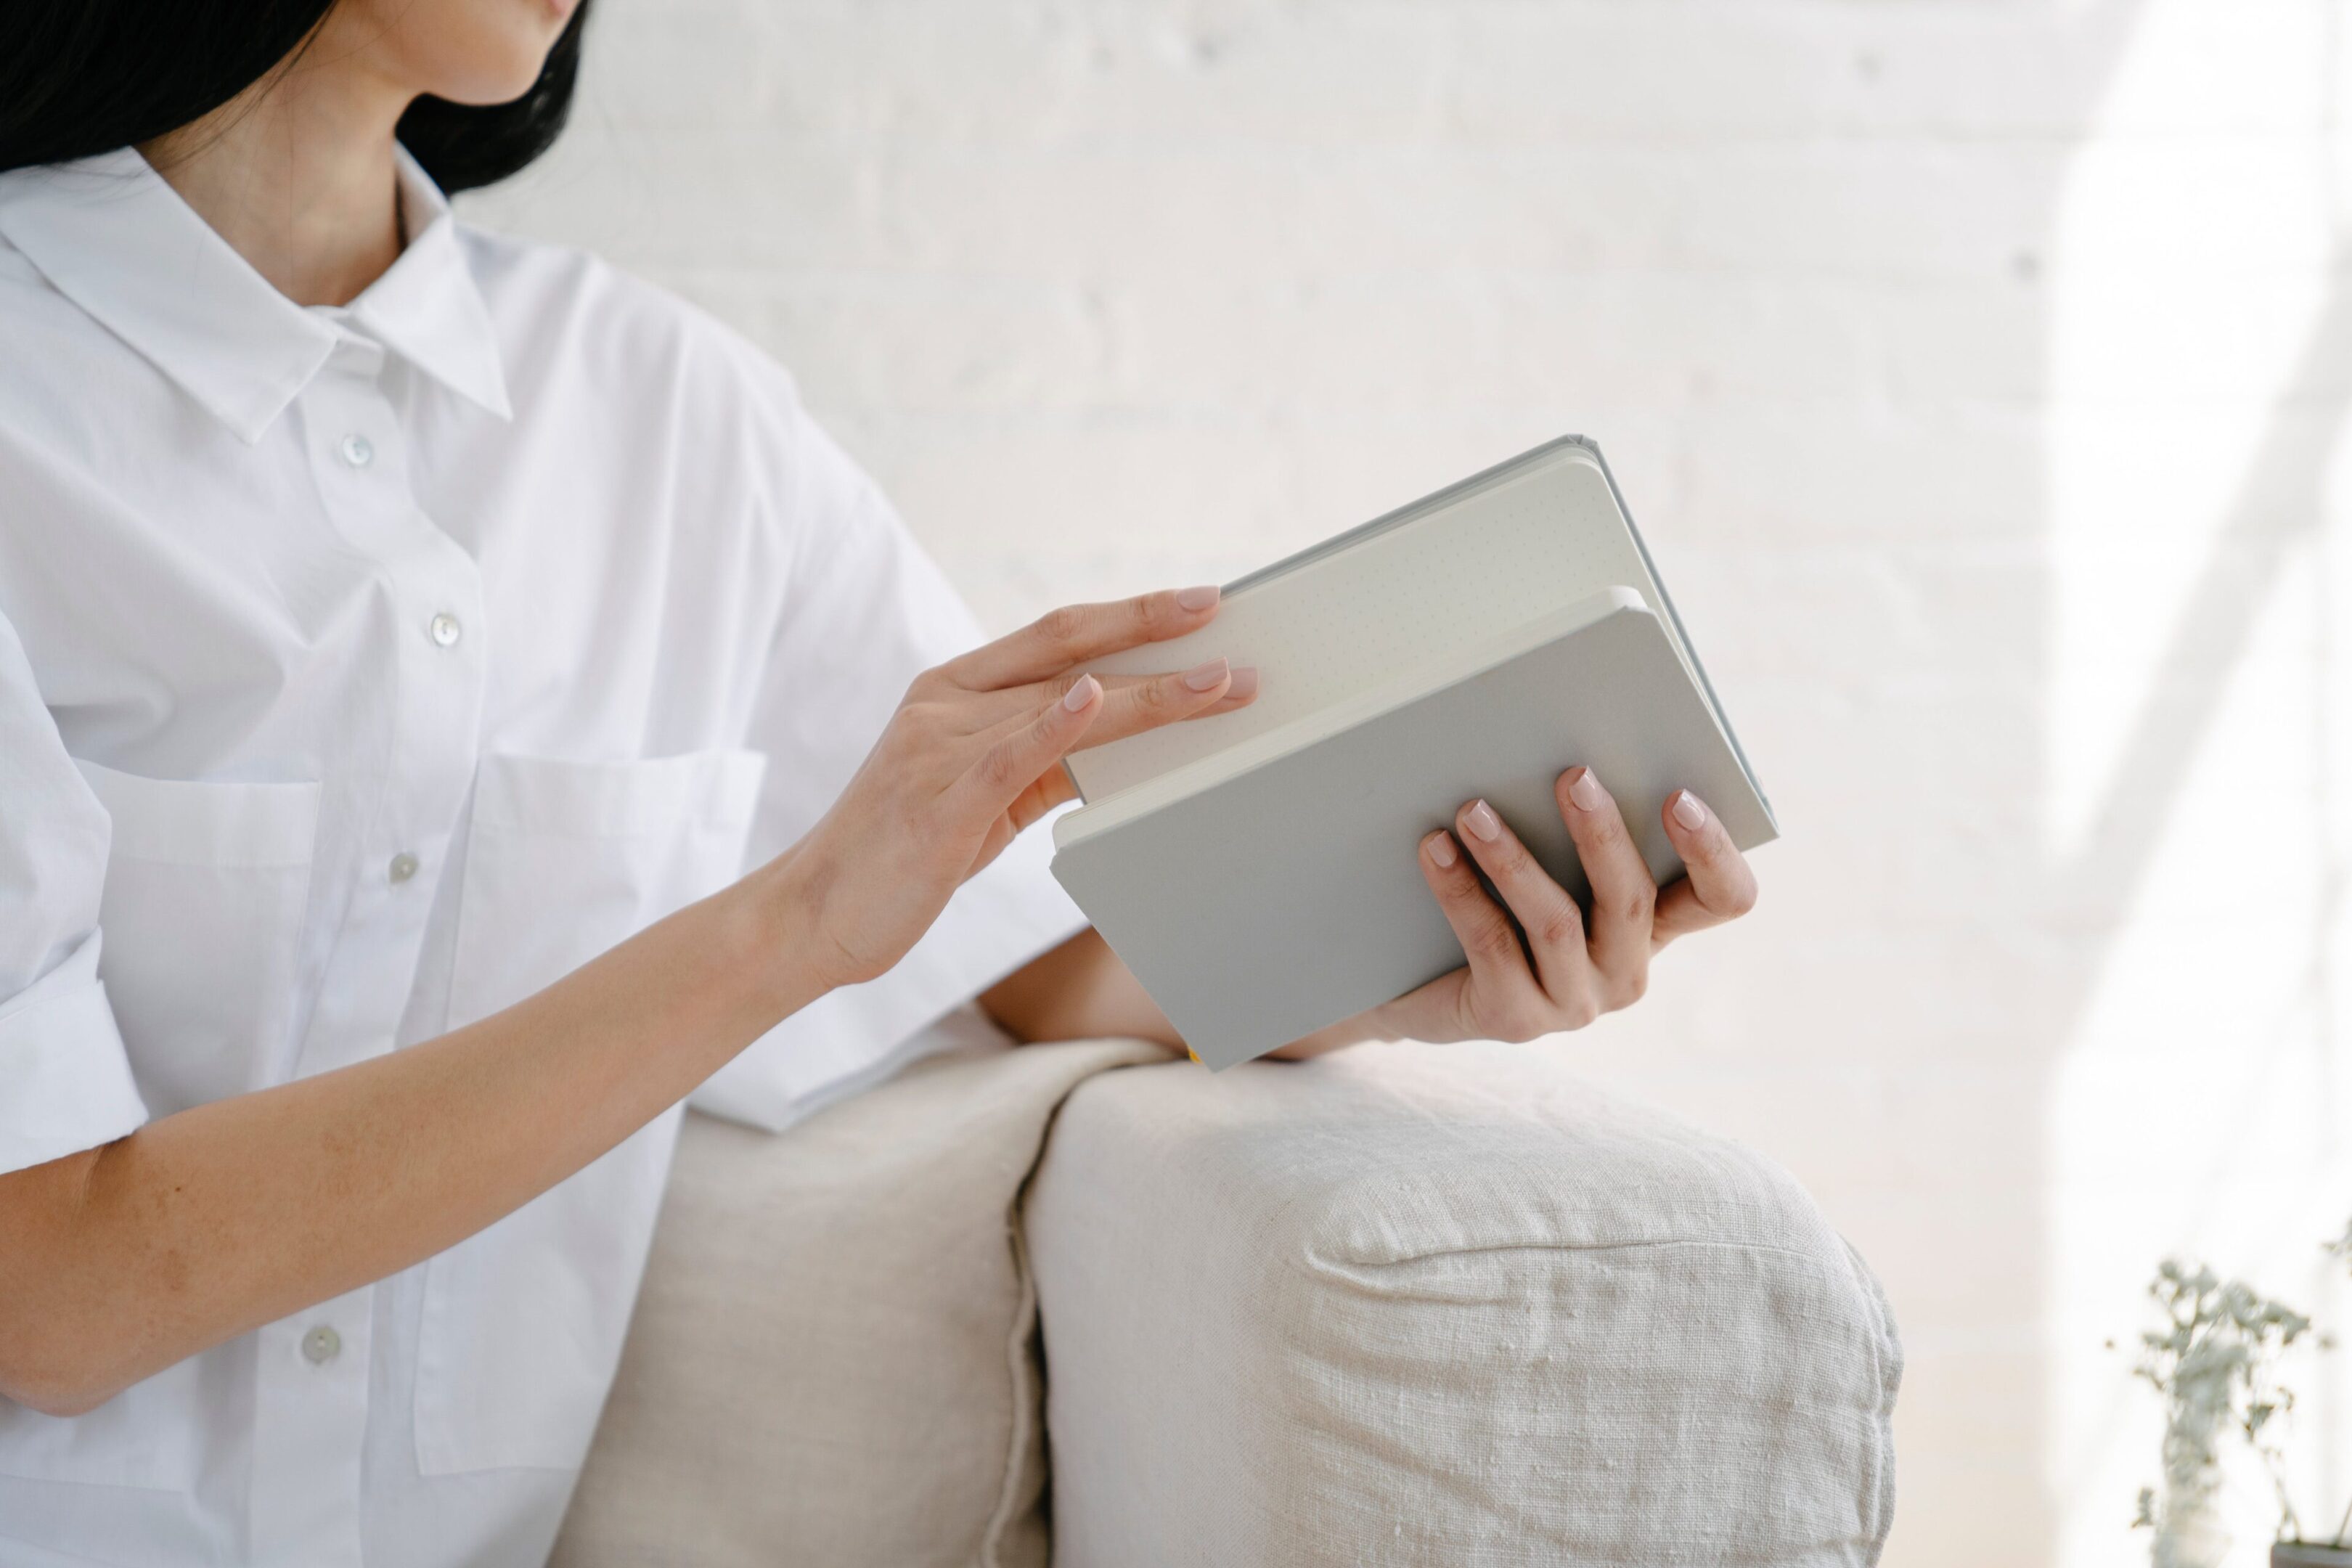 A person sitting on a couch holding an ipad